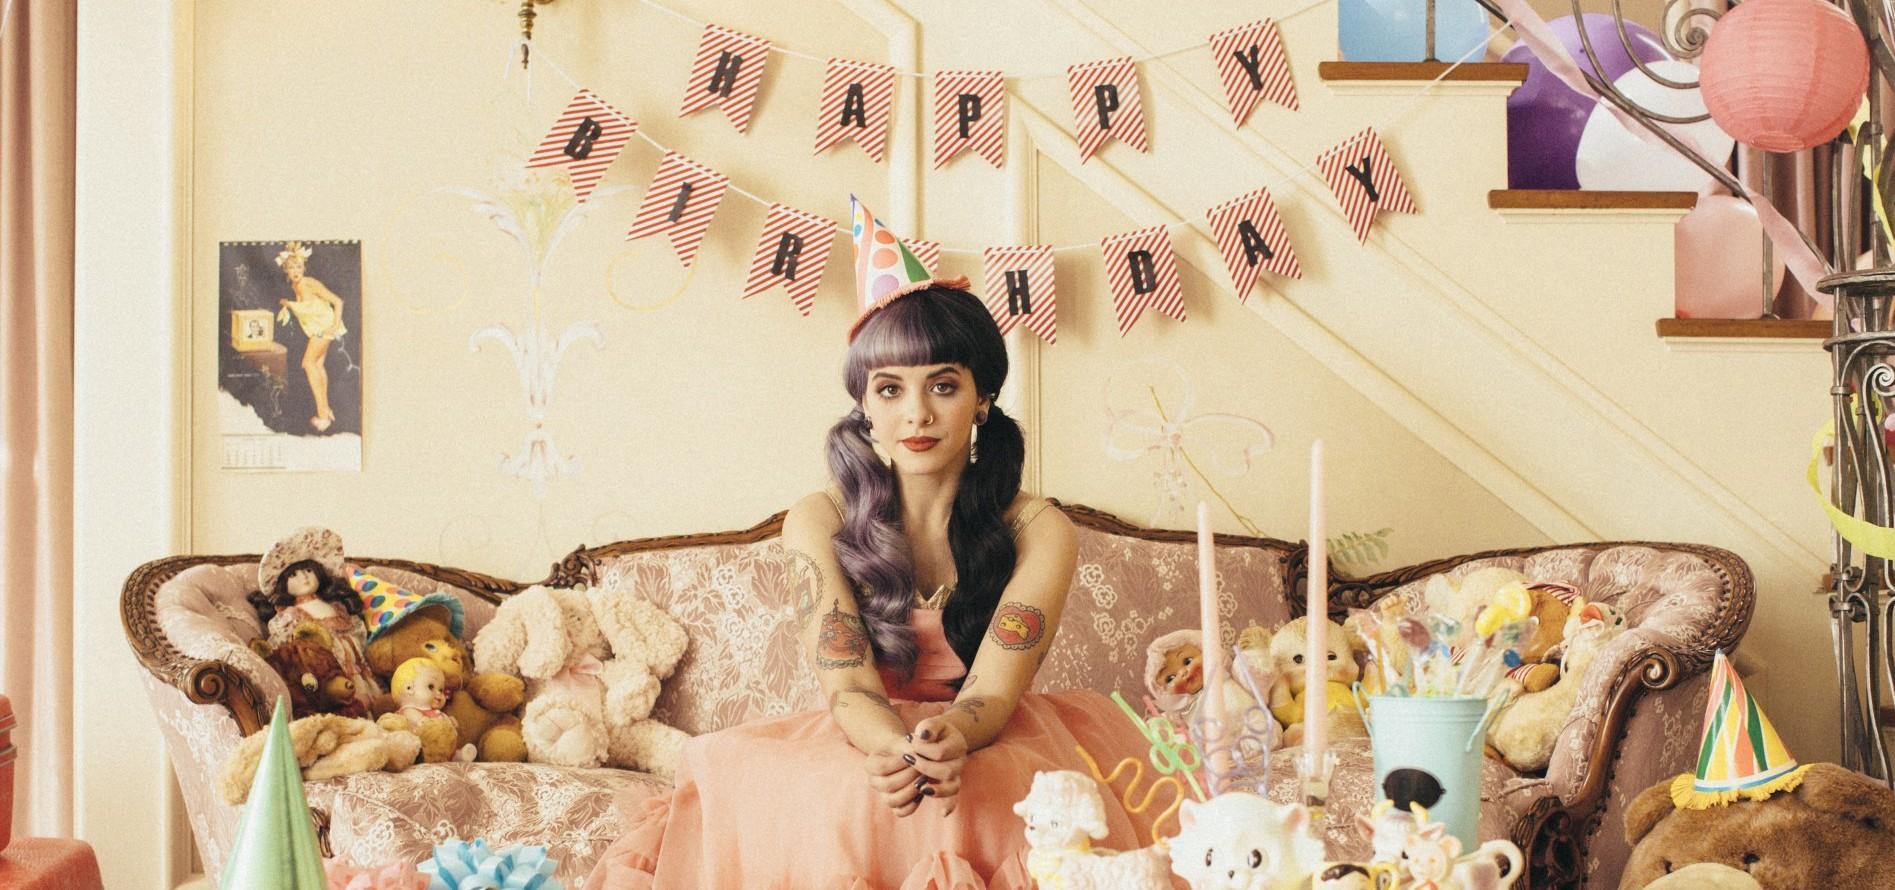 Melanie Martinez' Pacify Her Receives Gold Certification In United States